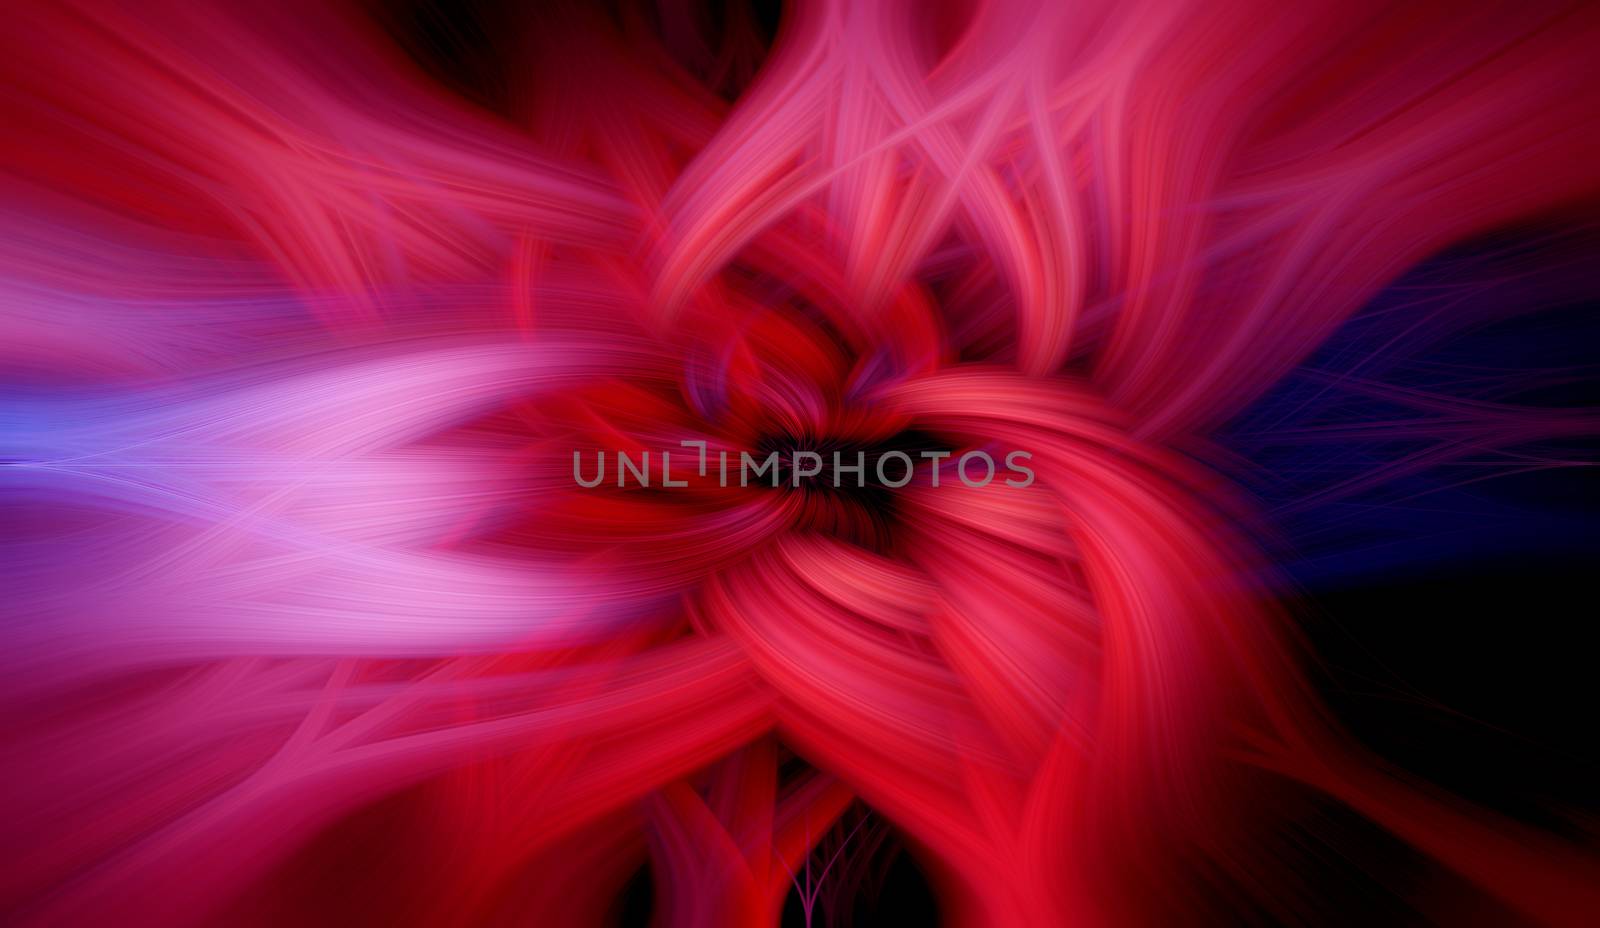 Beautiful abstract intertwined 3d fibers forming a shape of sparkle, flame, flower, interlinked hearts. Pink, blue, maroon, and purple colors. Illustration.